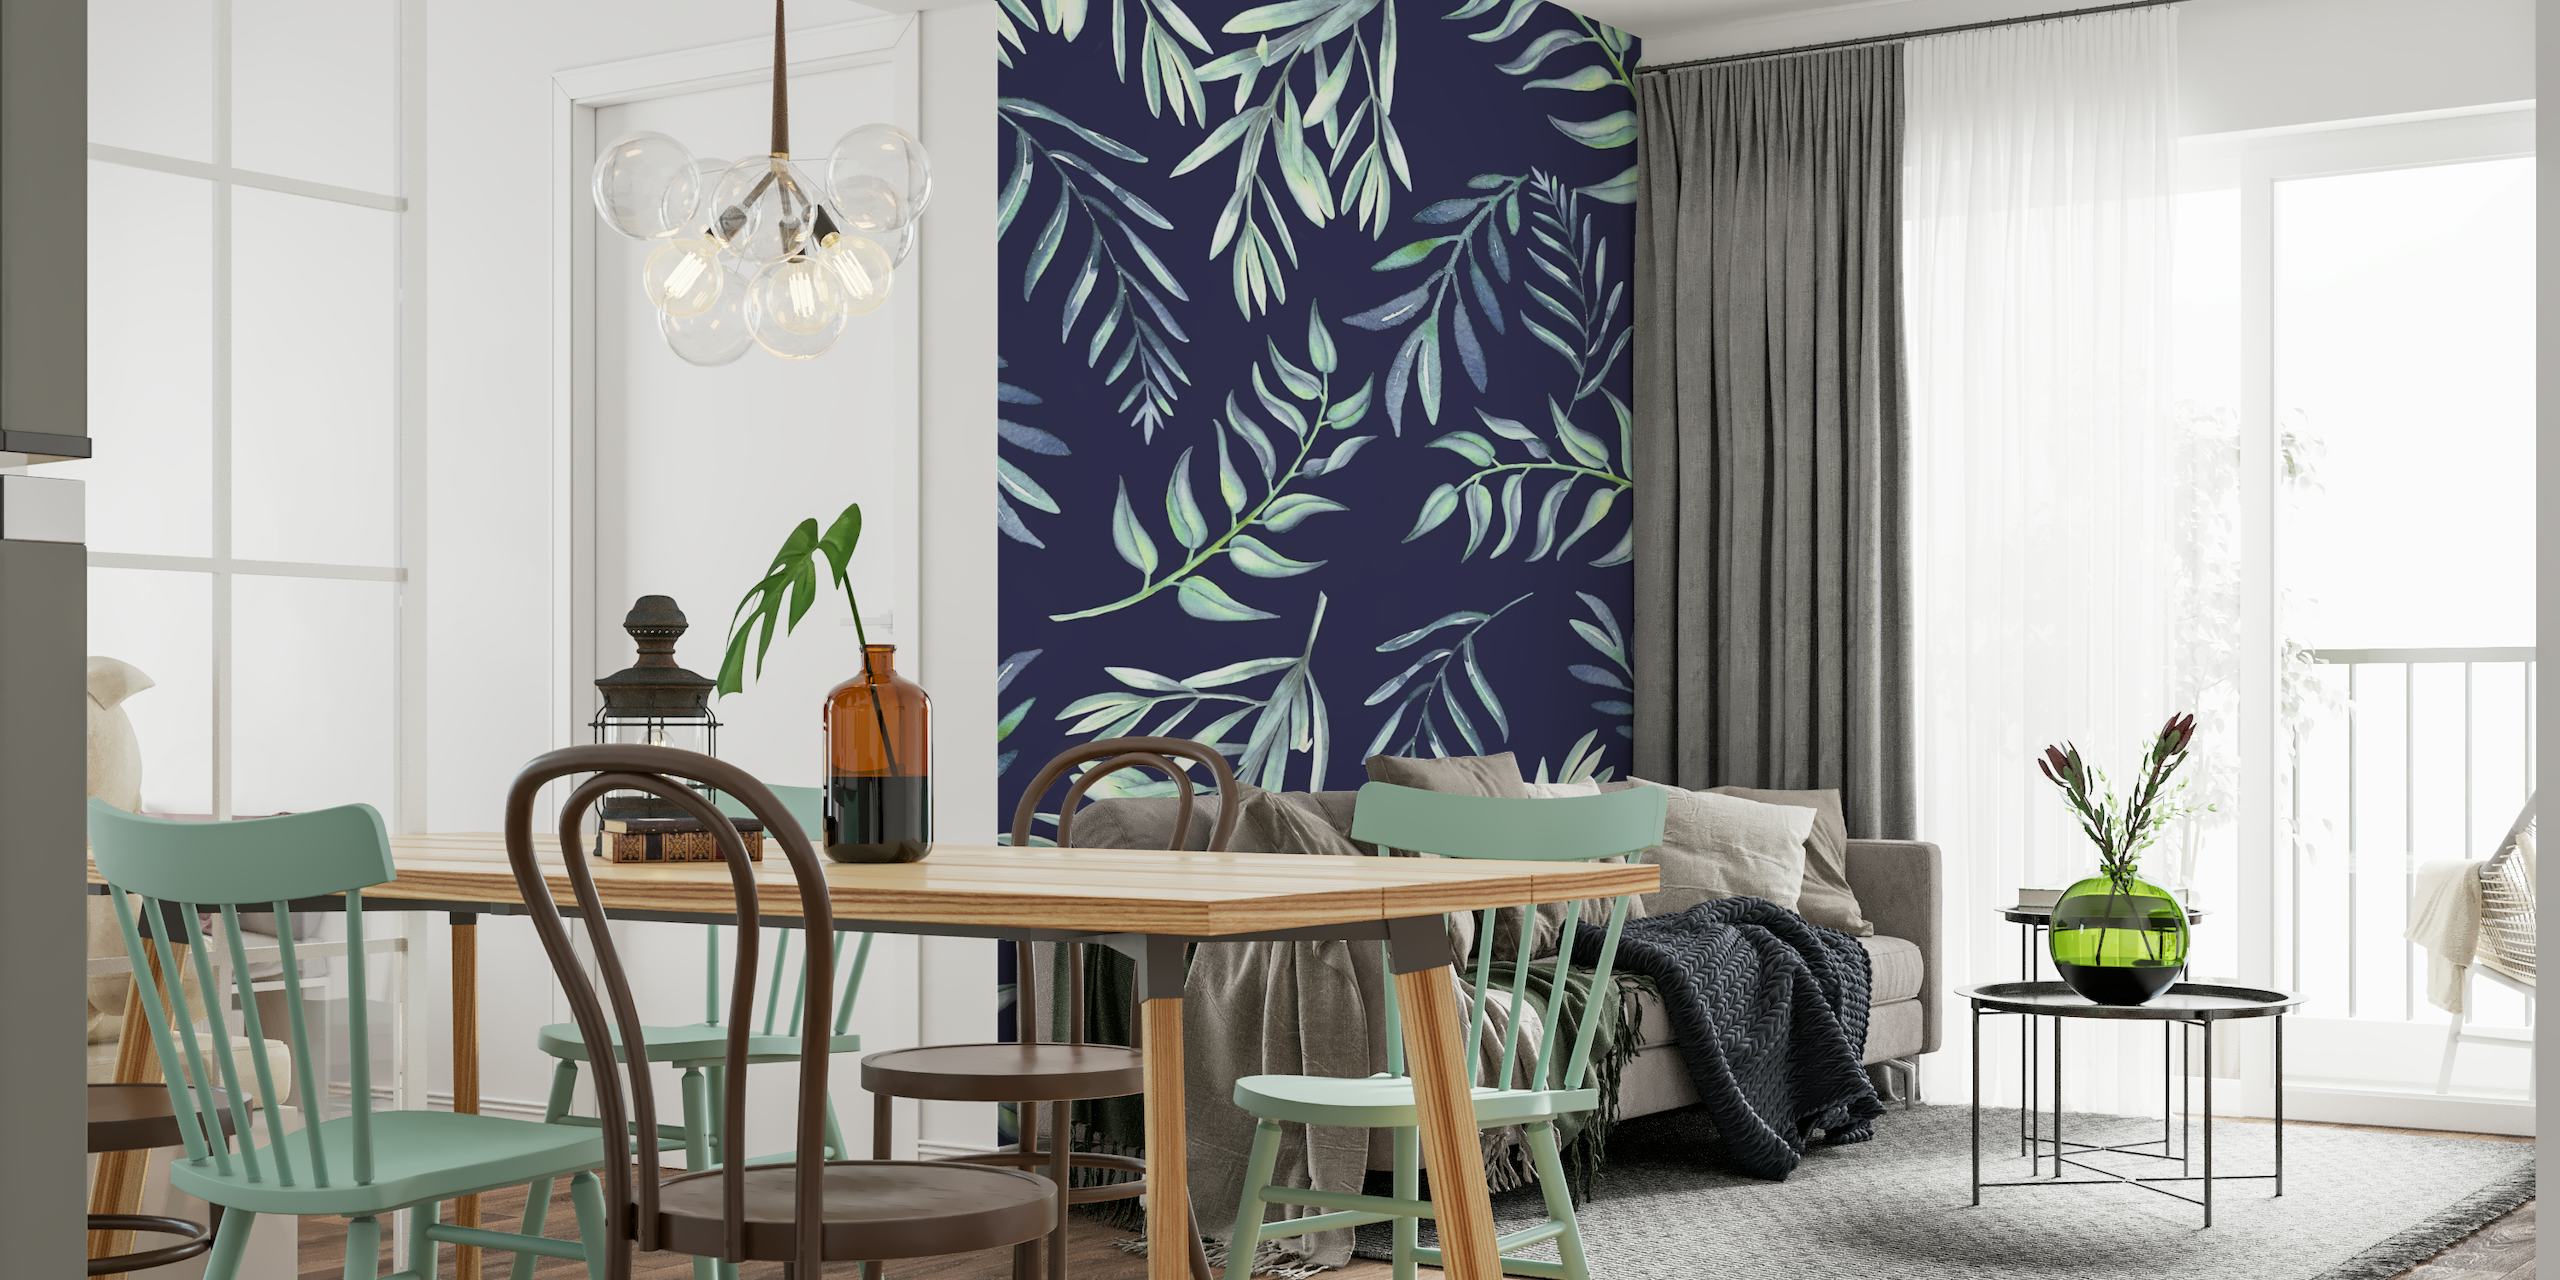 Floating Leaves Blue wall mural with stylized foliage on a dark blue background